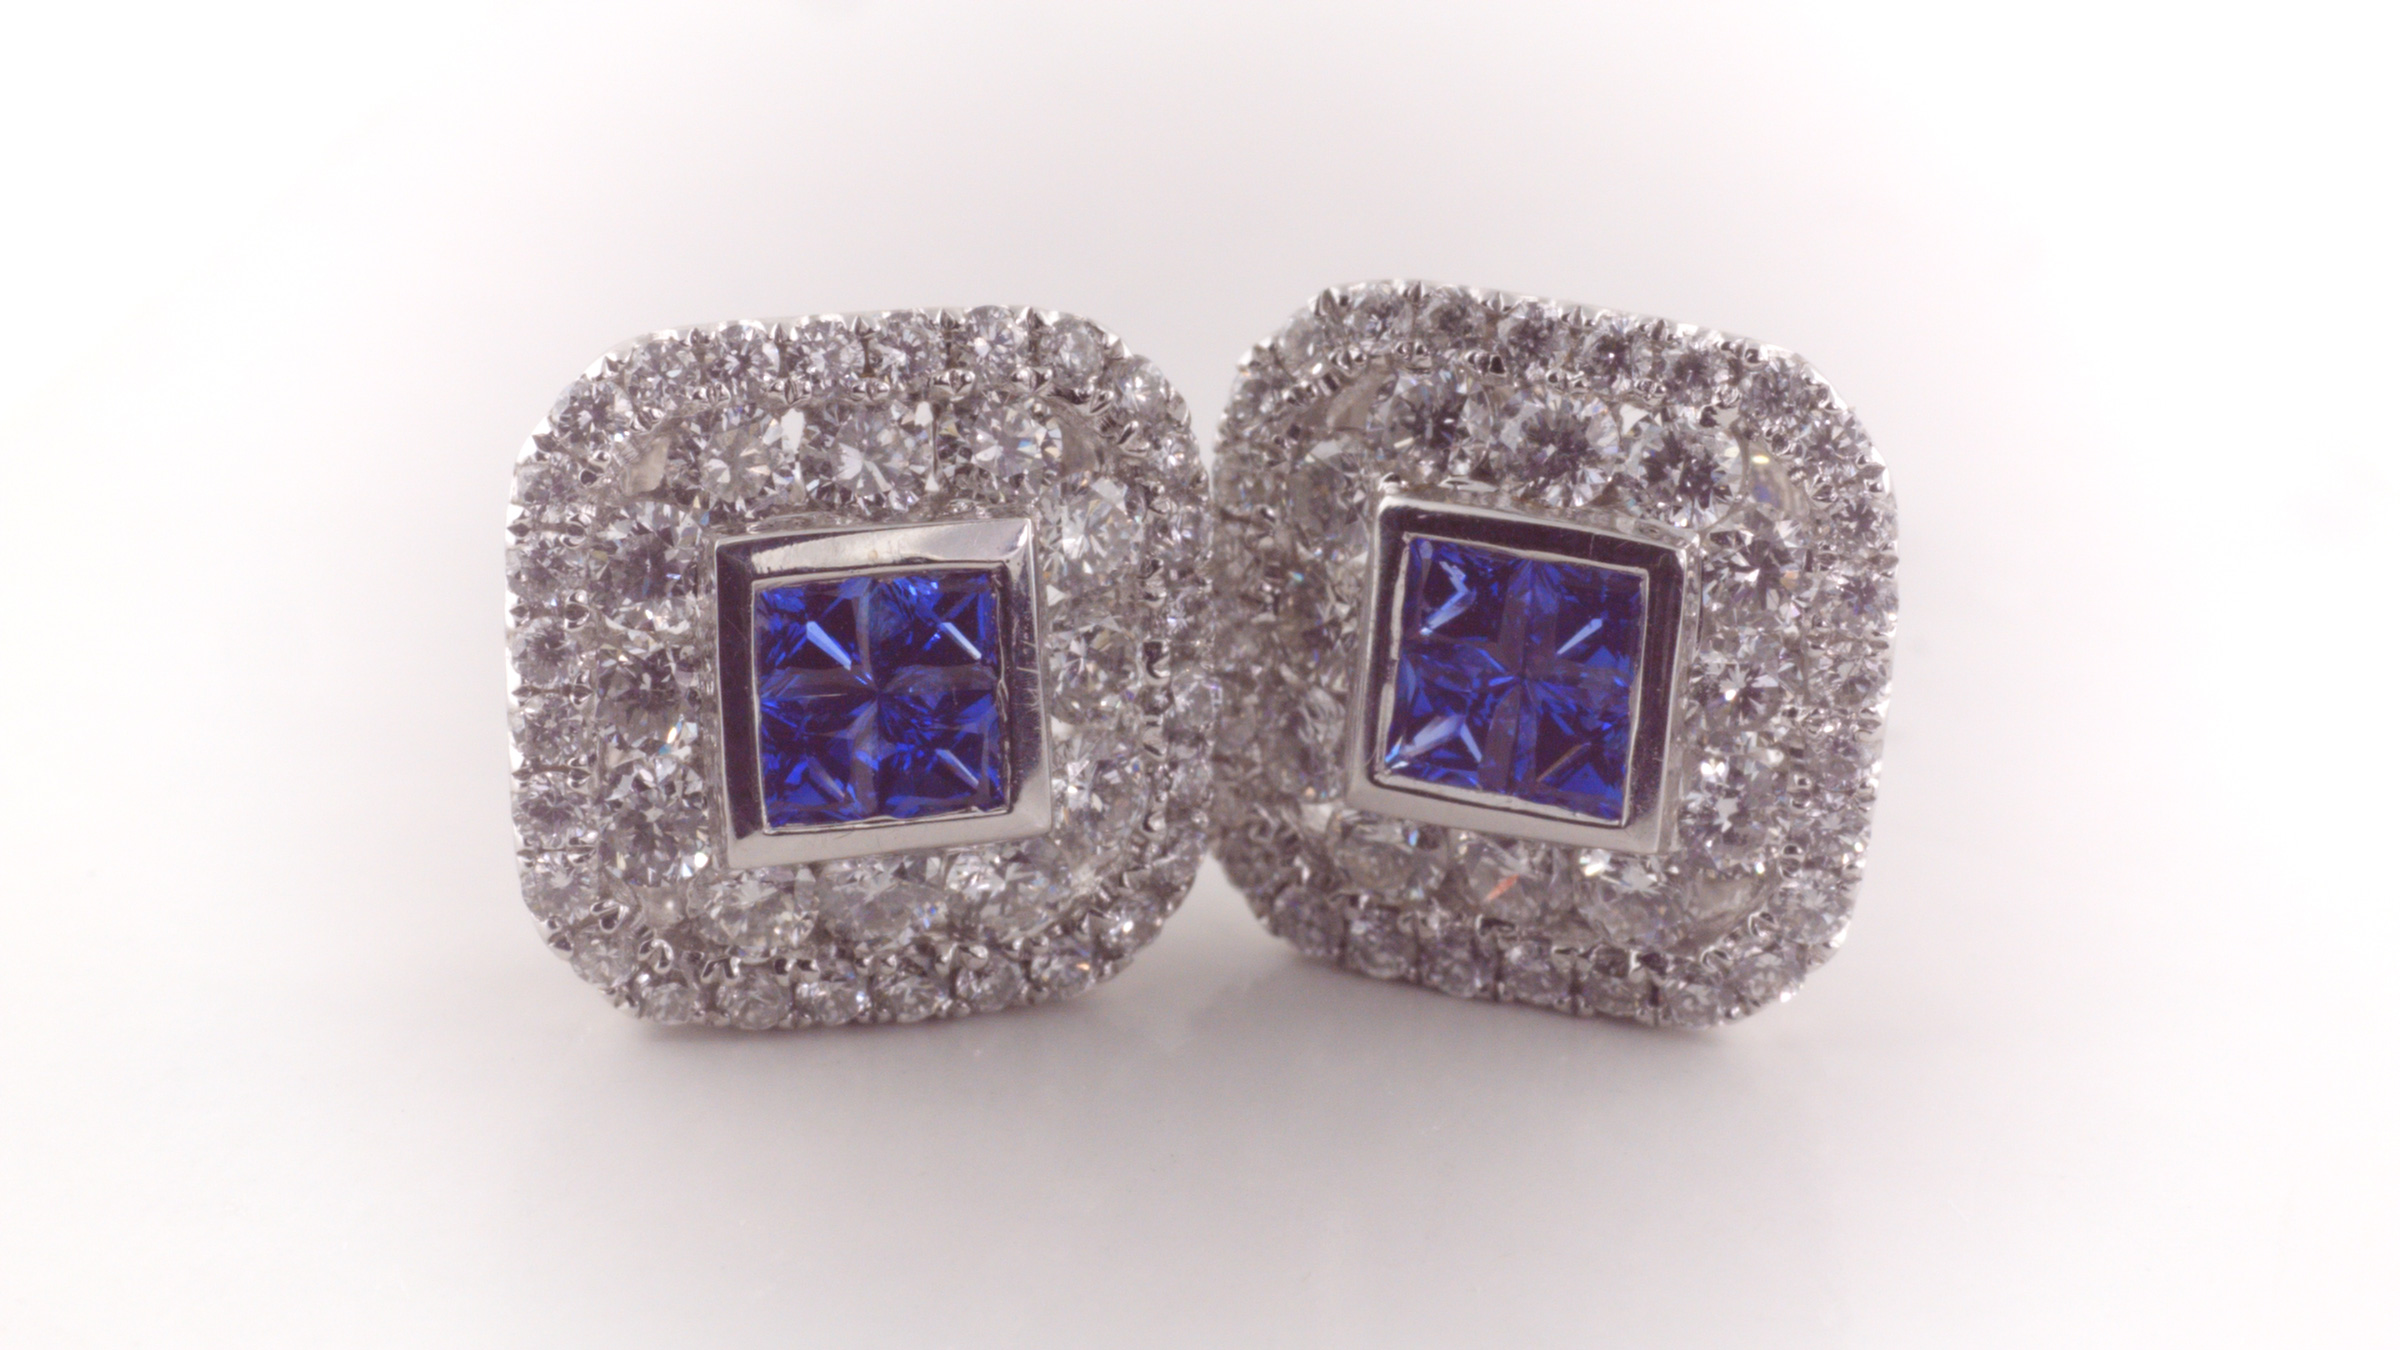 Sapphire and diamond earrings in 18K white gold.